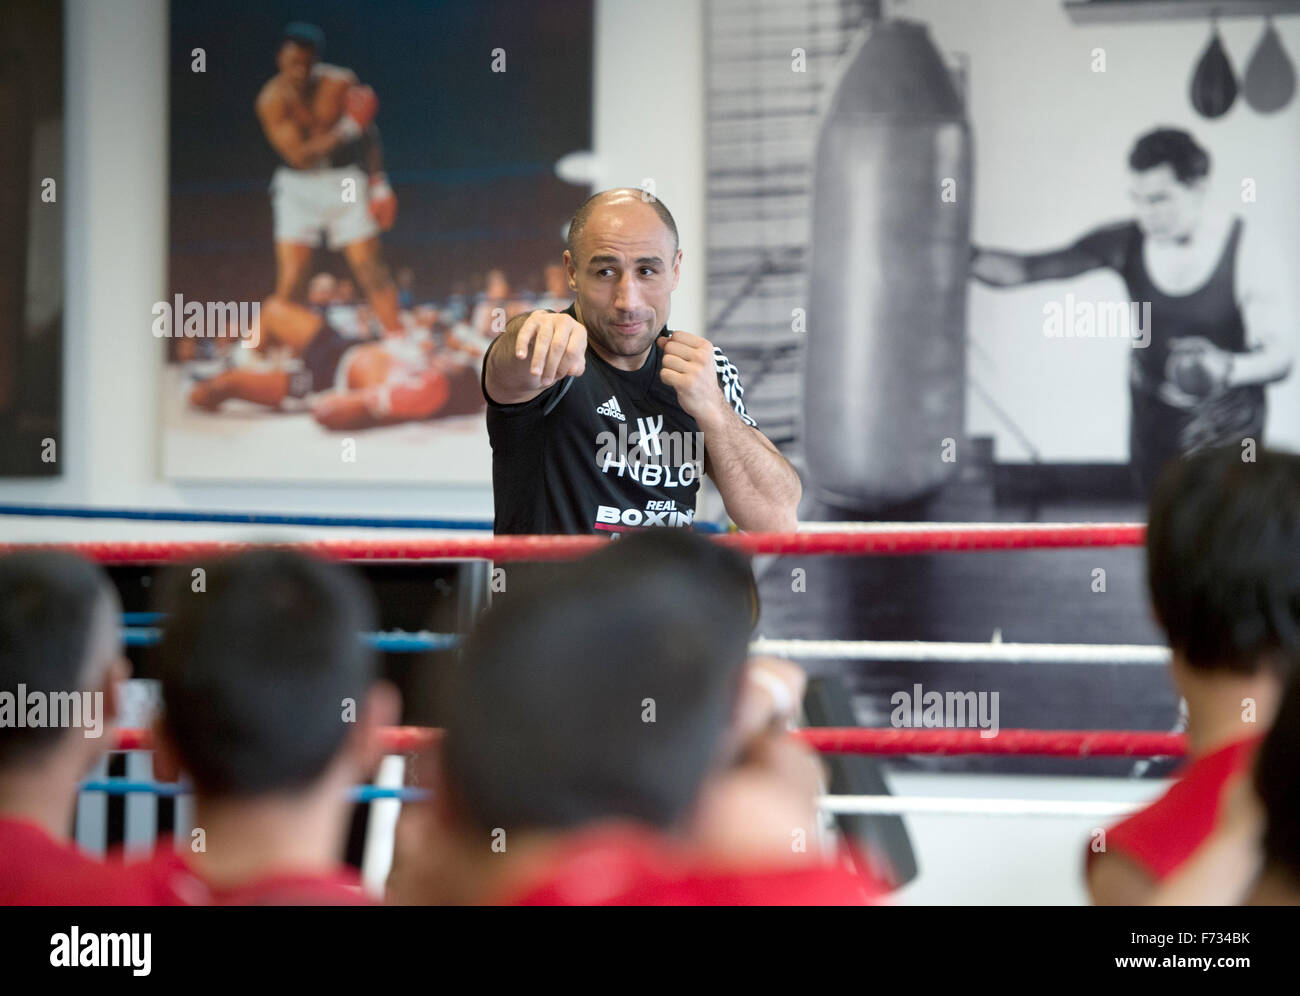 Boxing world champion Arthur Abraham works with underaged refugees during a training session at the Max Schmeling Gymnasium in Berlin, Germany, 24 November 2015. The event featuring unaccompanied refugees was organised by Team Sauerland, sporting goods manufacturer Adidas, the German Confederation of   Skilled Crafts and German political party CDU. Photo: SOEREN STACHE/dpa Stock Photo